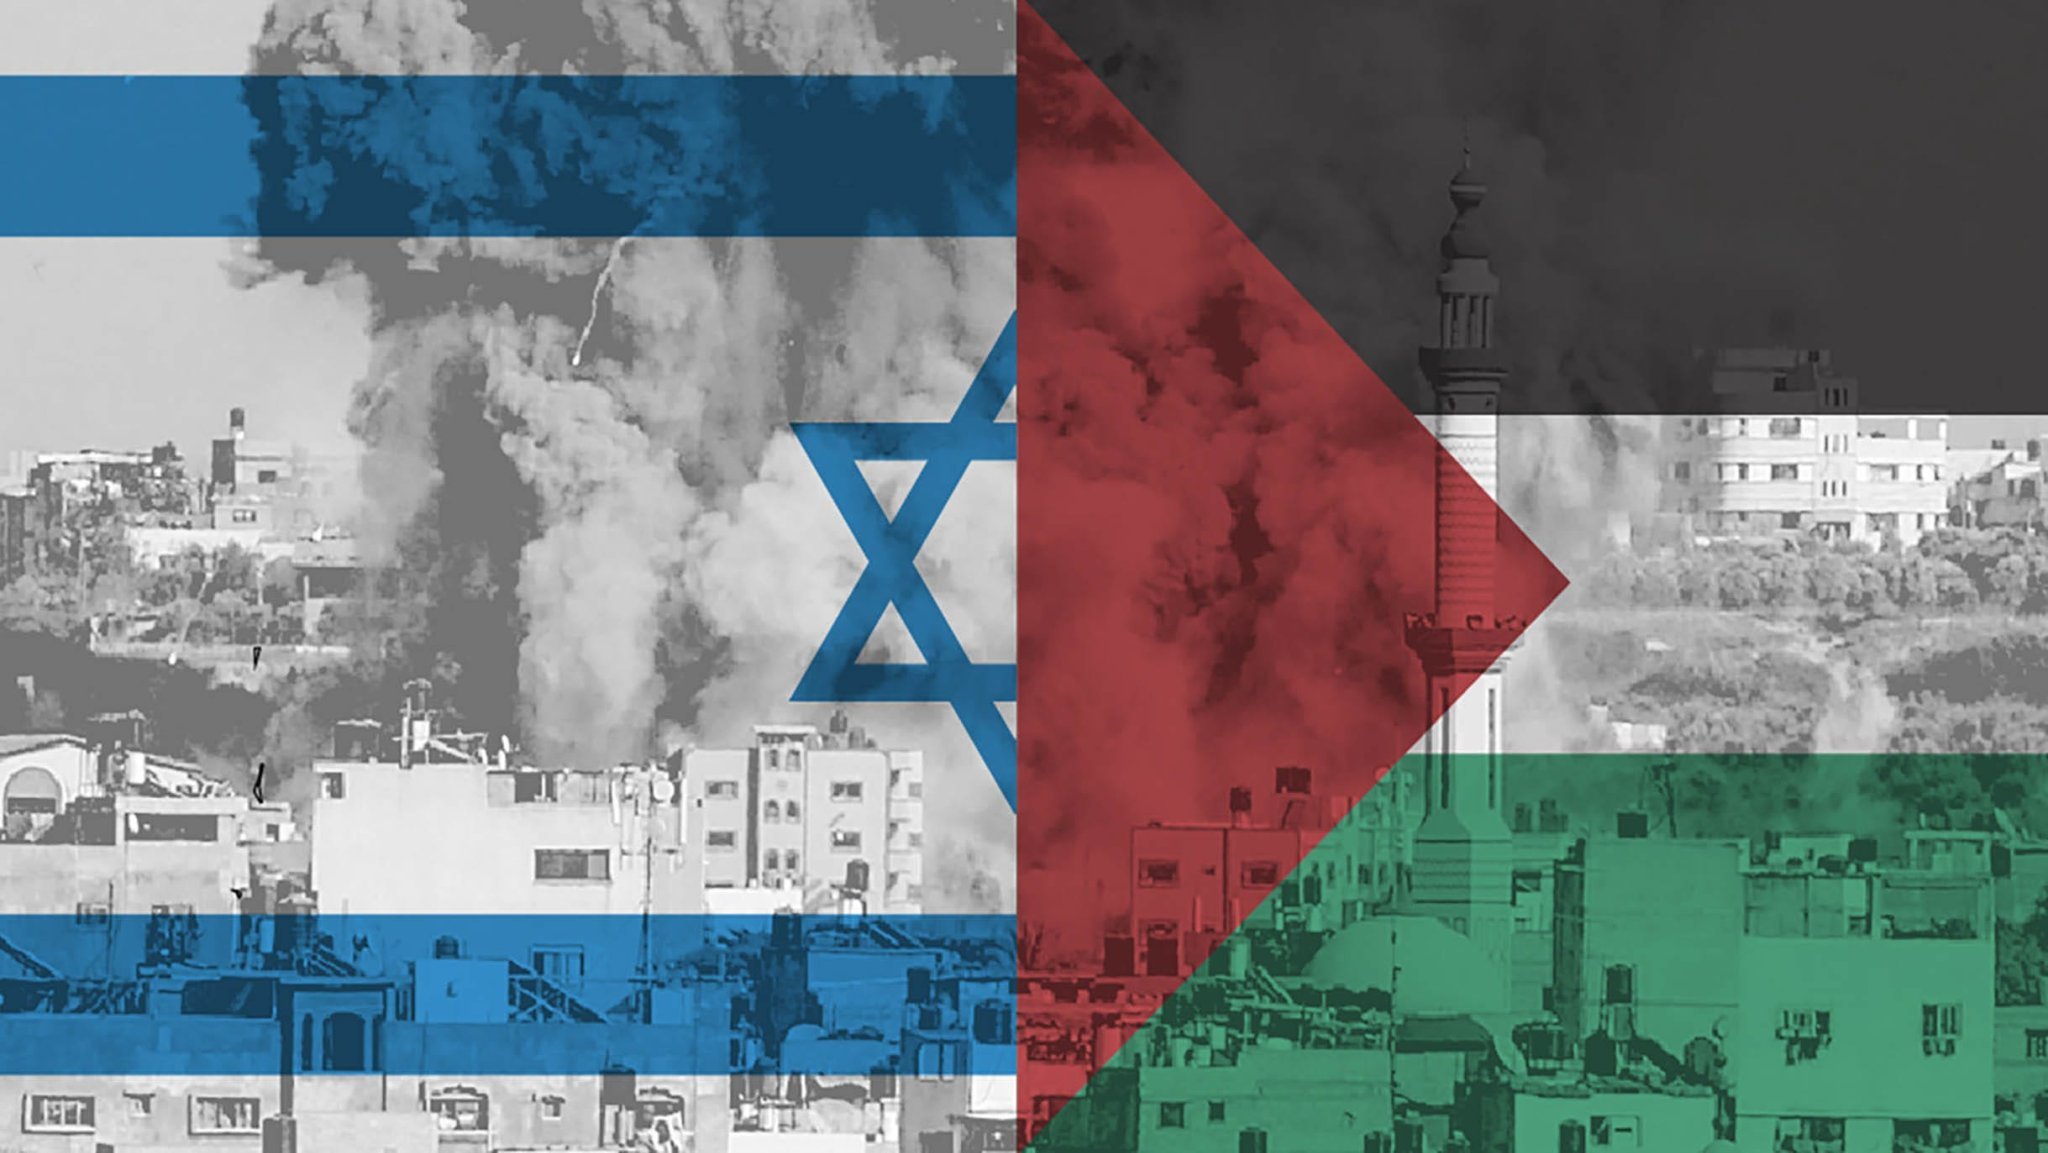 History of the Israeli-Palestinian Conflict